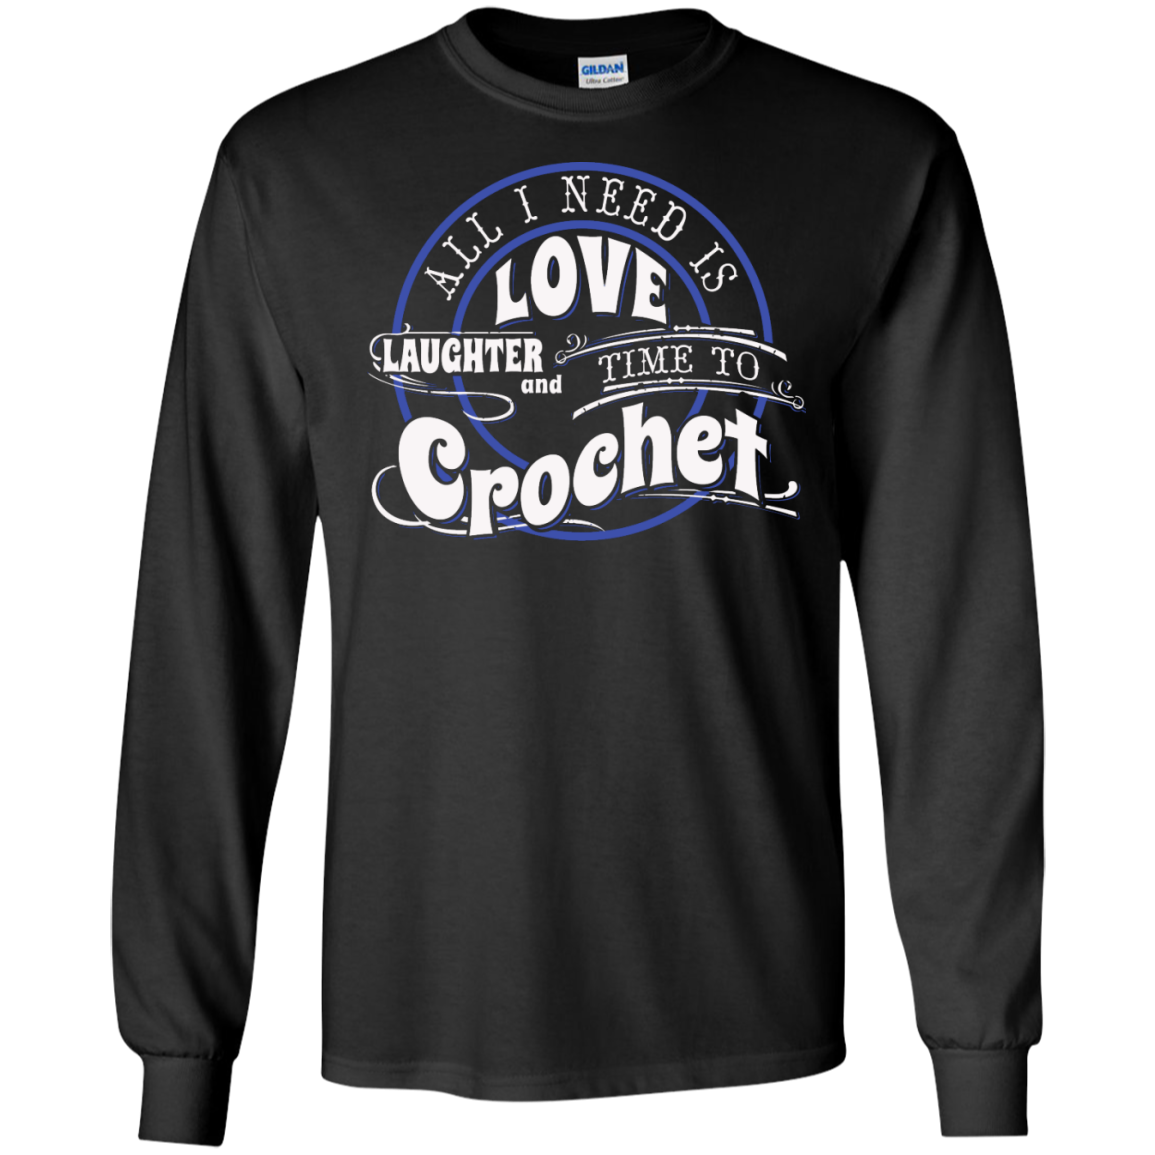 Time to Crochet Long Sleeve Ultra Cotton T-Shirt - Crafter4Life - 2